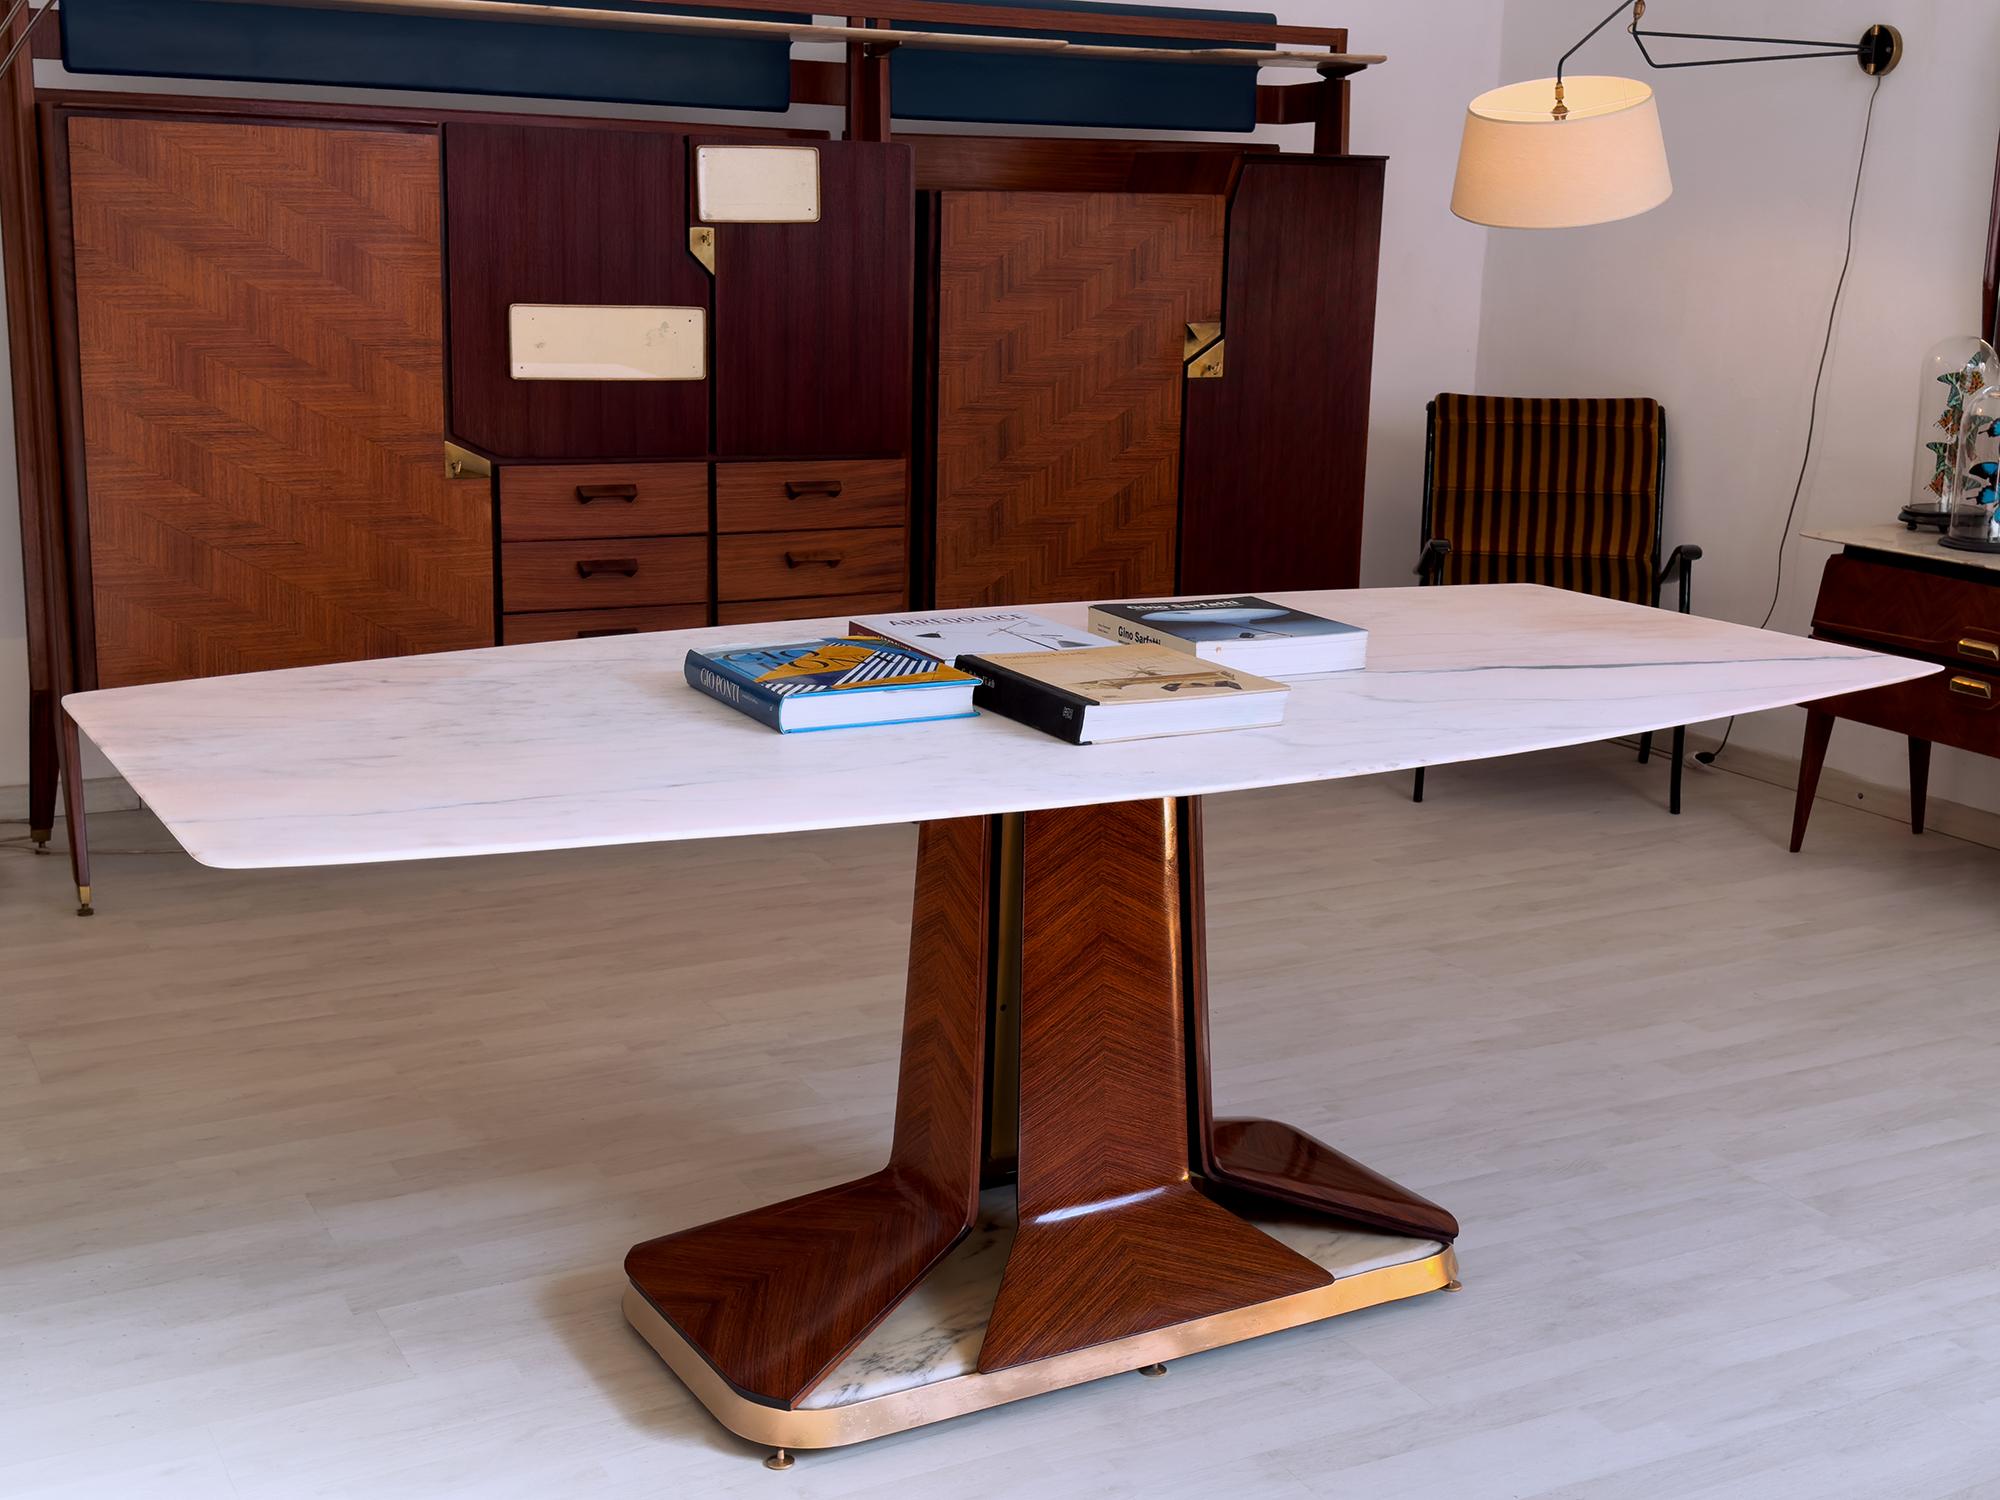 Italian Mid-Century Dining Table by Vittorio Dassi, 1950s For Sale 3